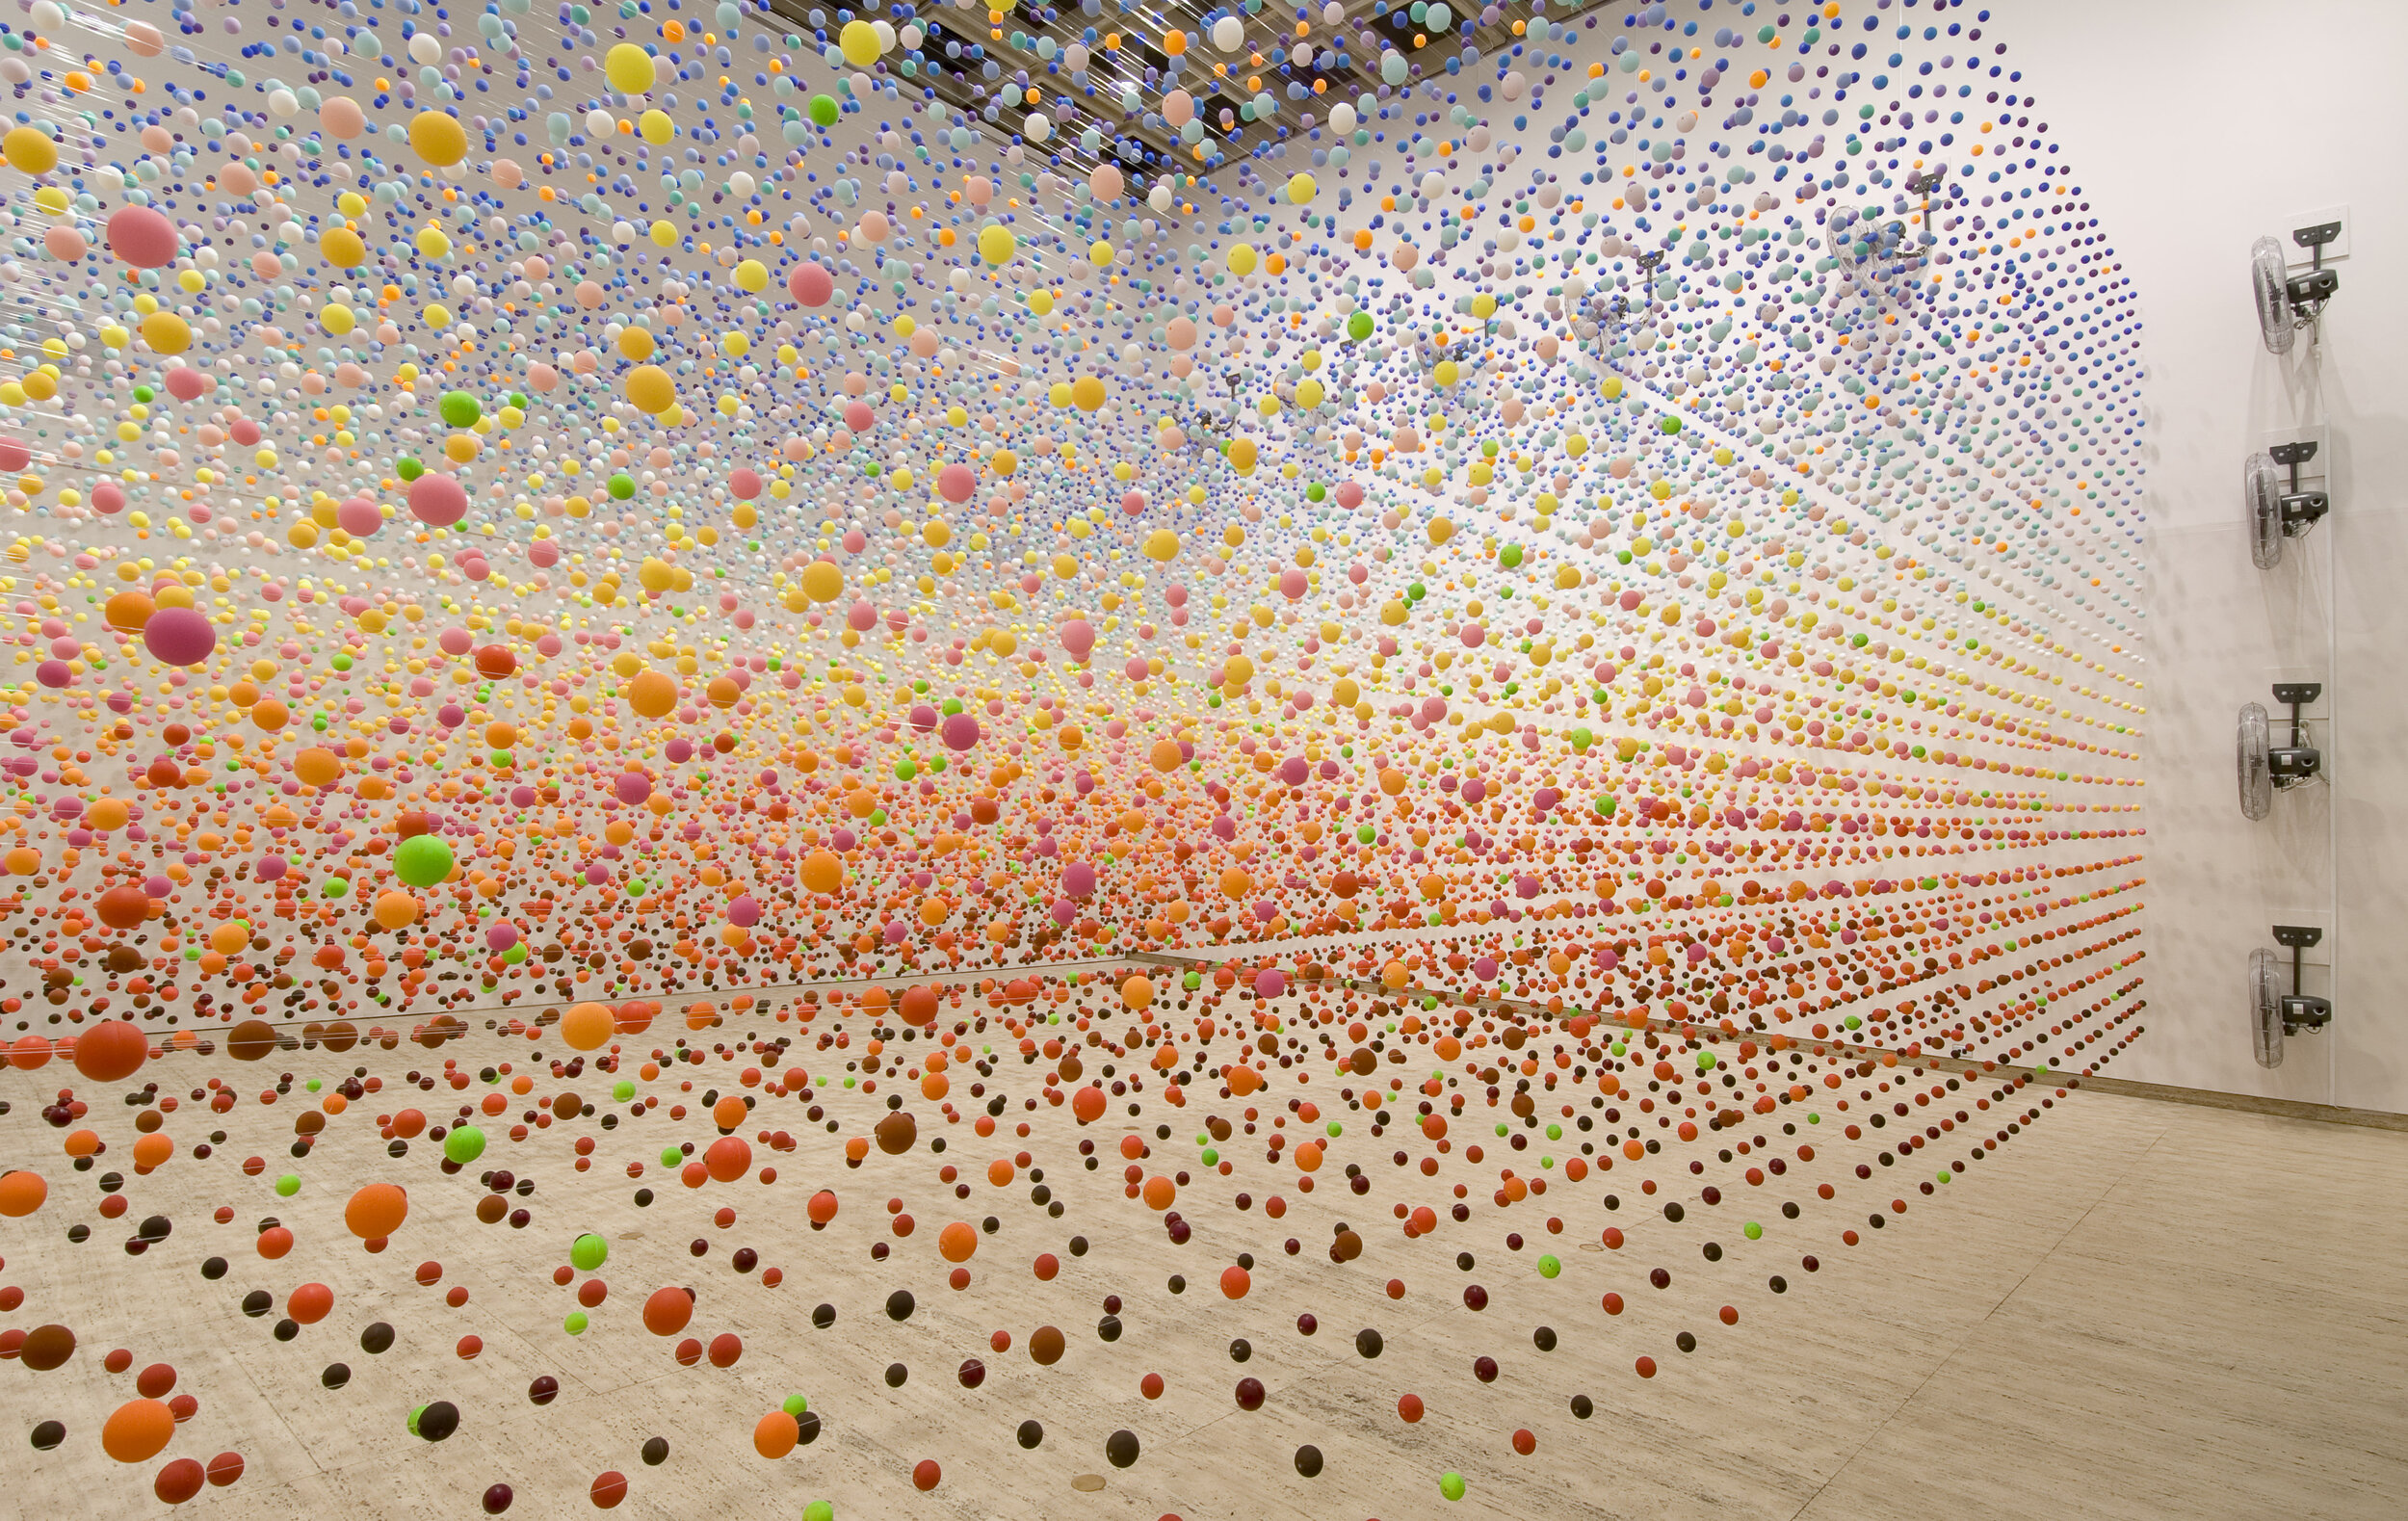  Nike Savvas,  Atomic: full of love, full of wonder , 2005, polystyrene, nylon, polymer paint, electric fans, air movement. In the AGNSW collection. 